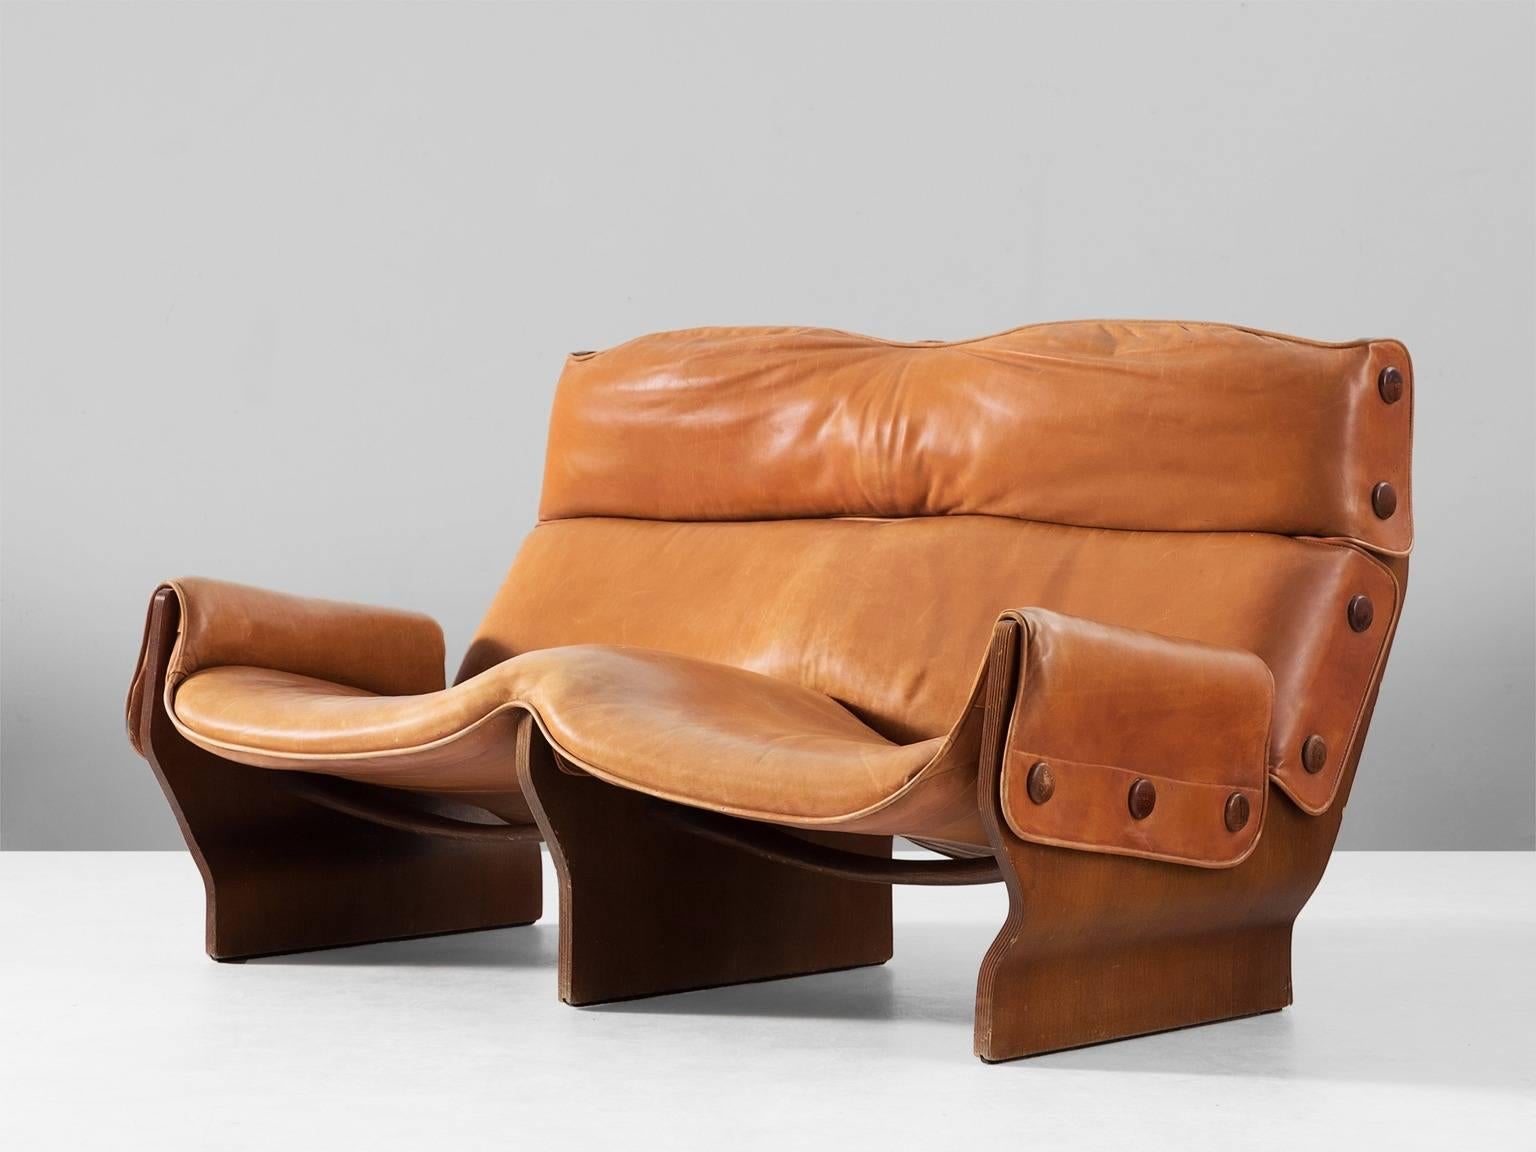 Settee 'Canada', in plywood and leather, by Osvaldo Borsani for Tecno, Italy, 1960s.

The 'Canada' sofa is composed of two sides made of moulded plywood connected by two contoured solid wood crosspieces performed in teak. Upholstered in original